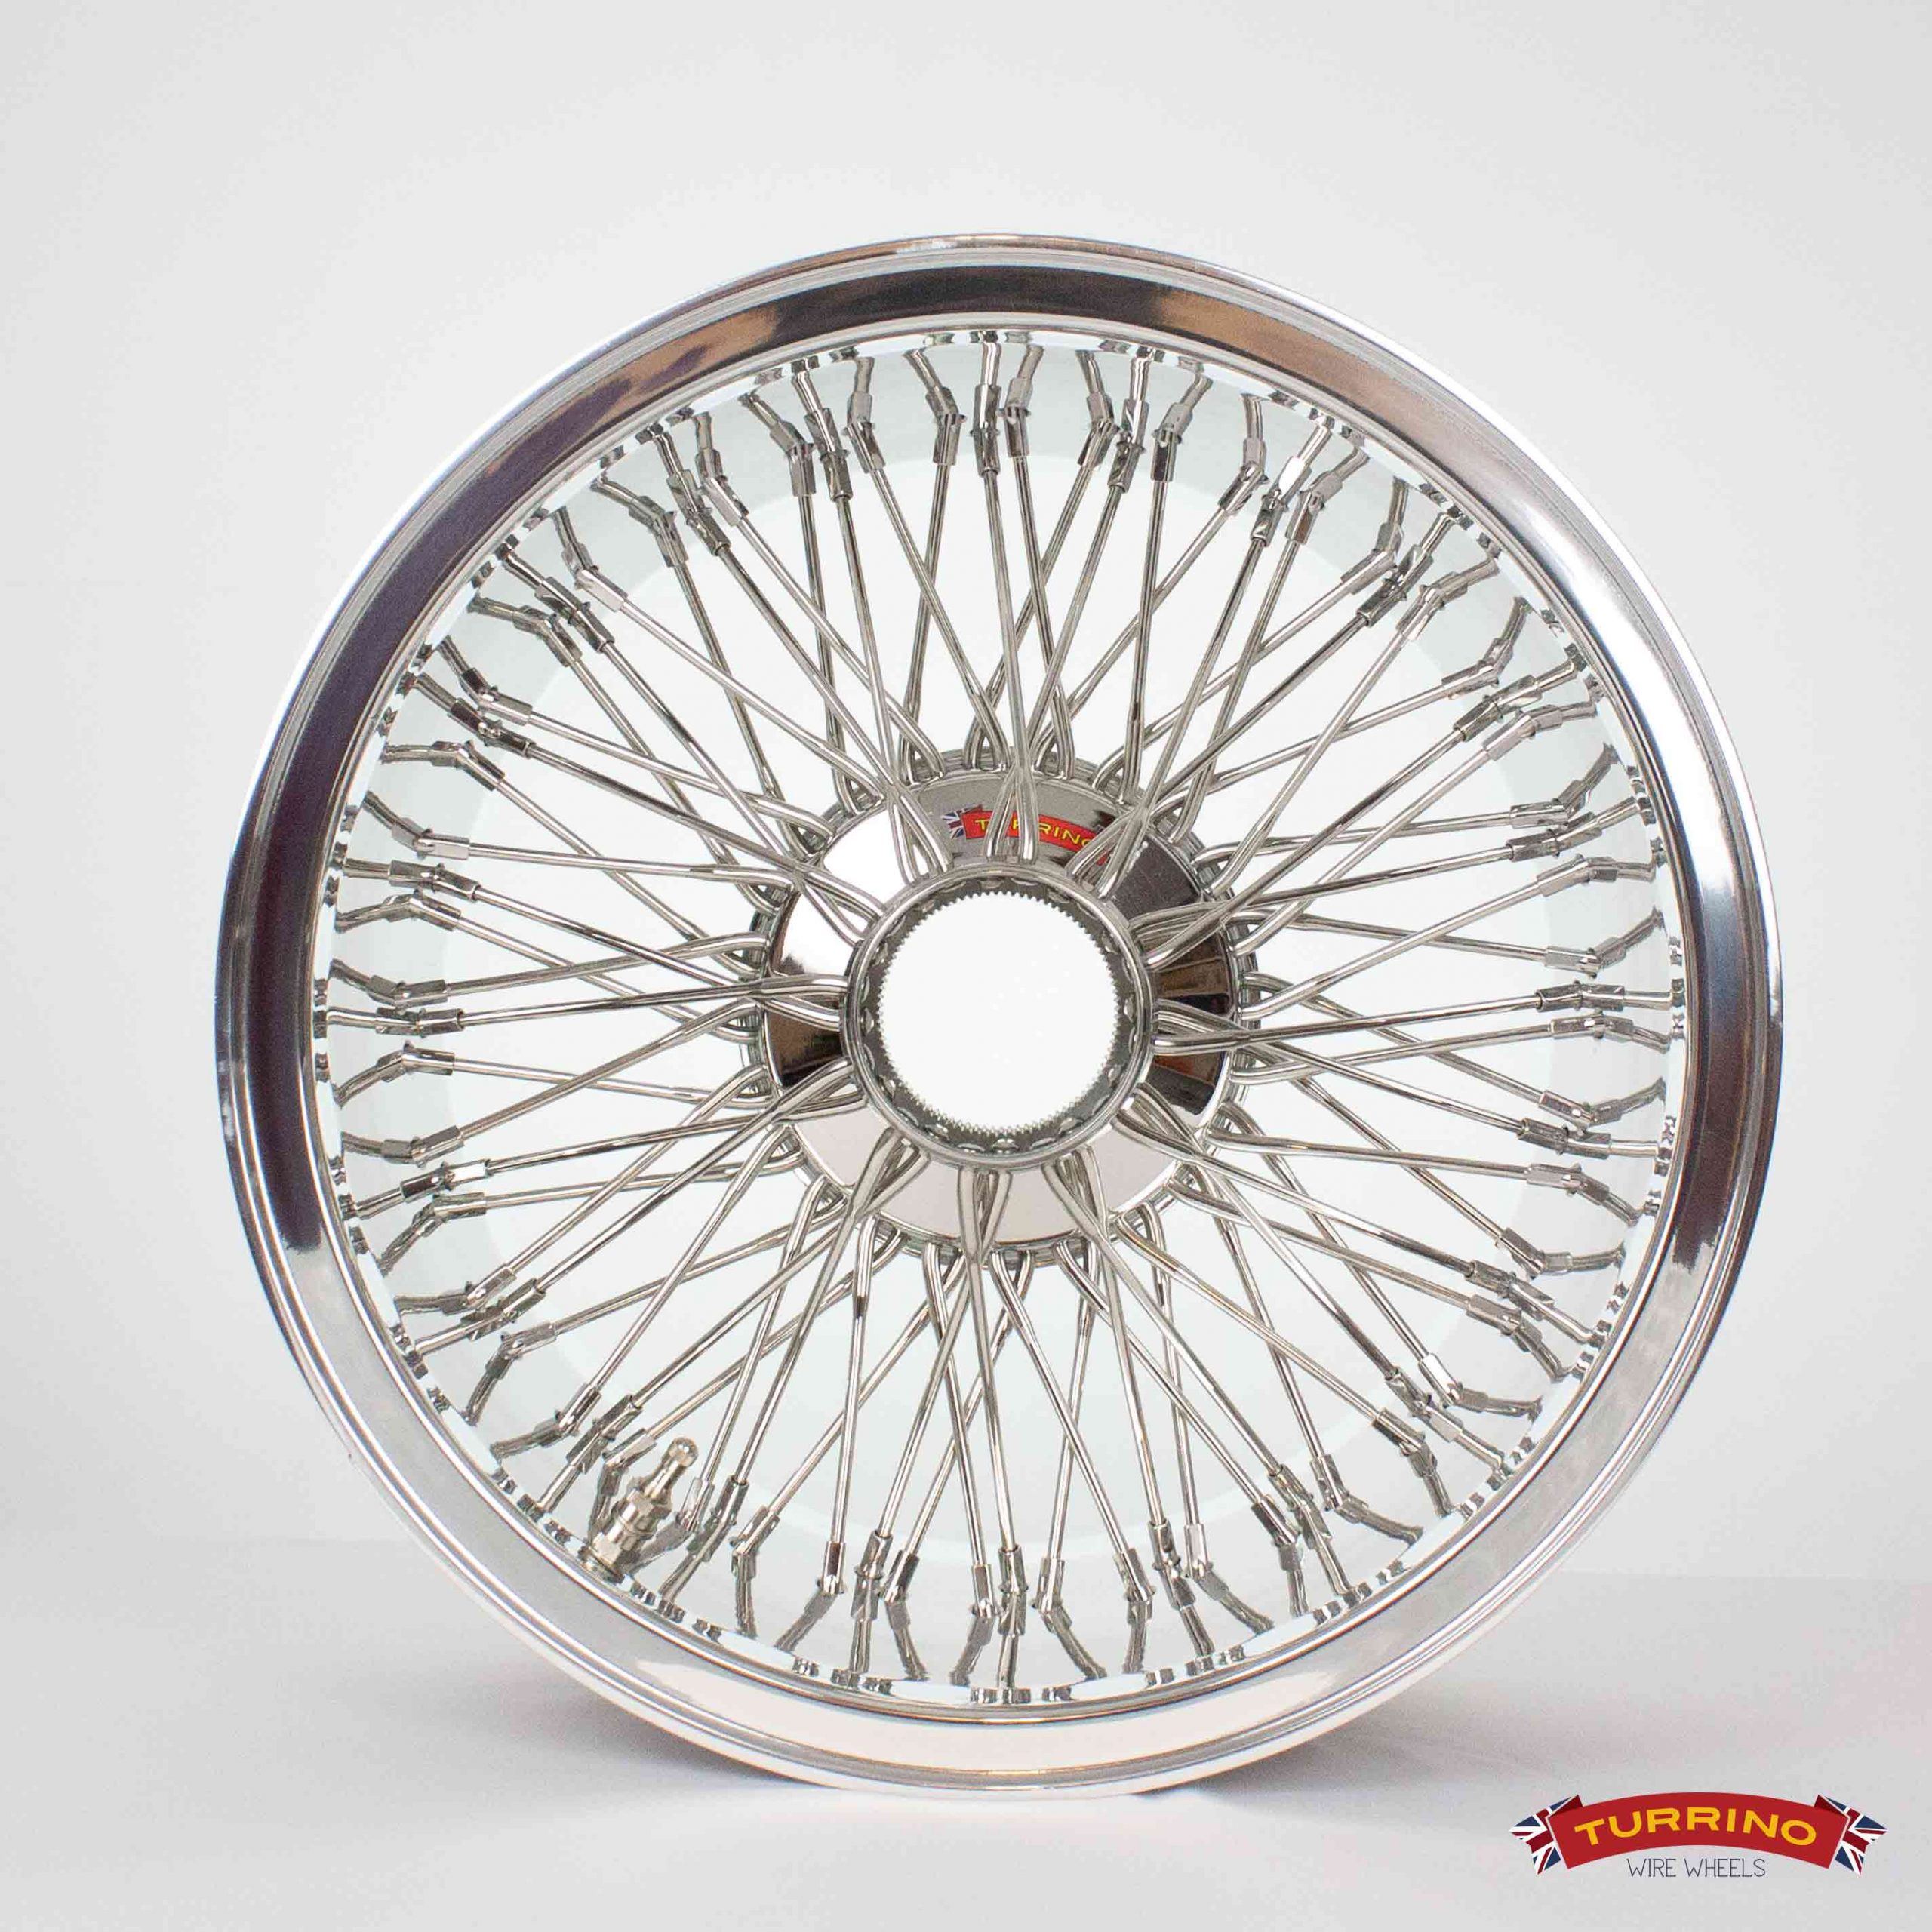 Jaguar 7.5x16 undimpled reversed rim reduced offset fully polished alloy rim wire wheel